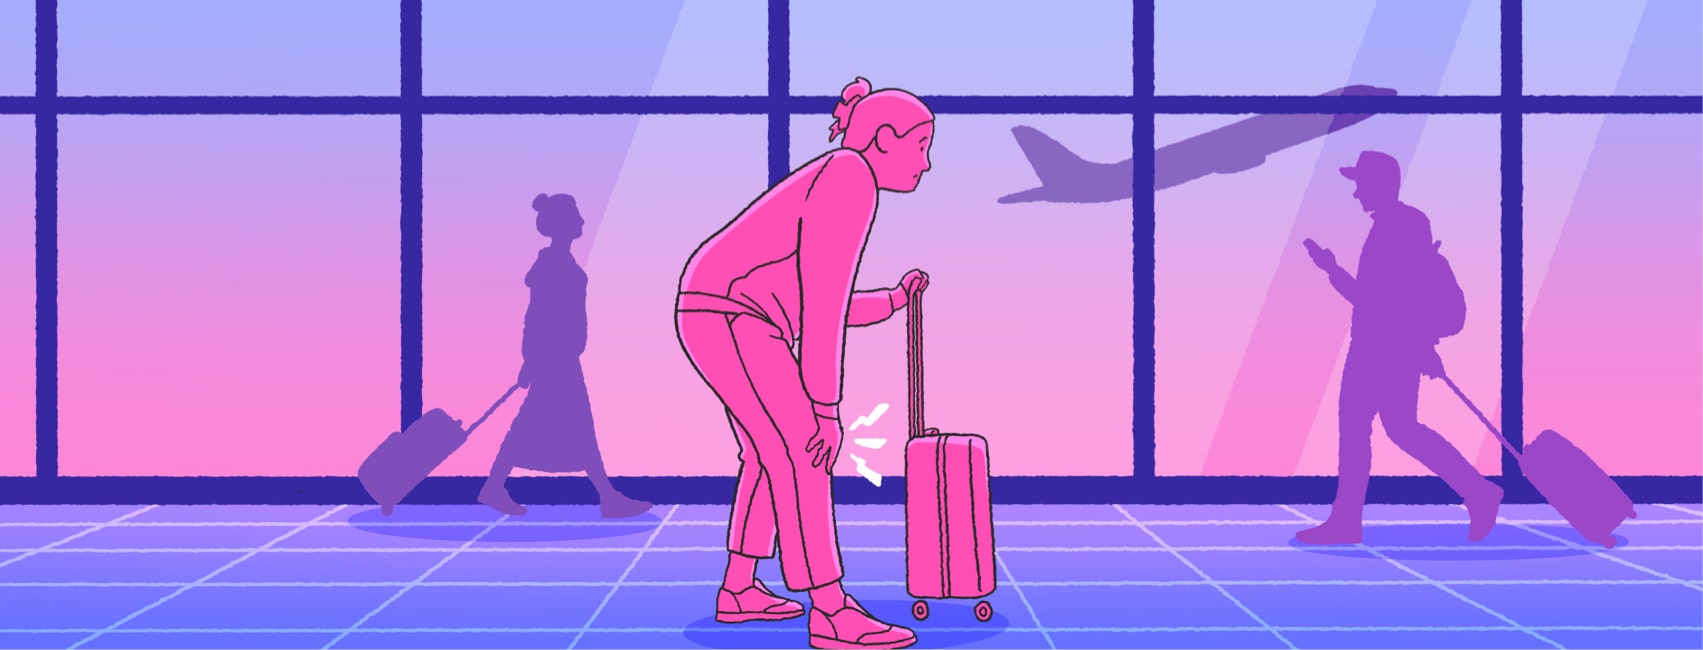 Navigating The Airport with Psoriatic Arthritis image